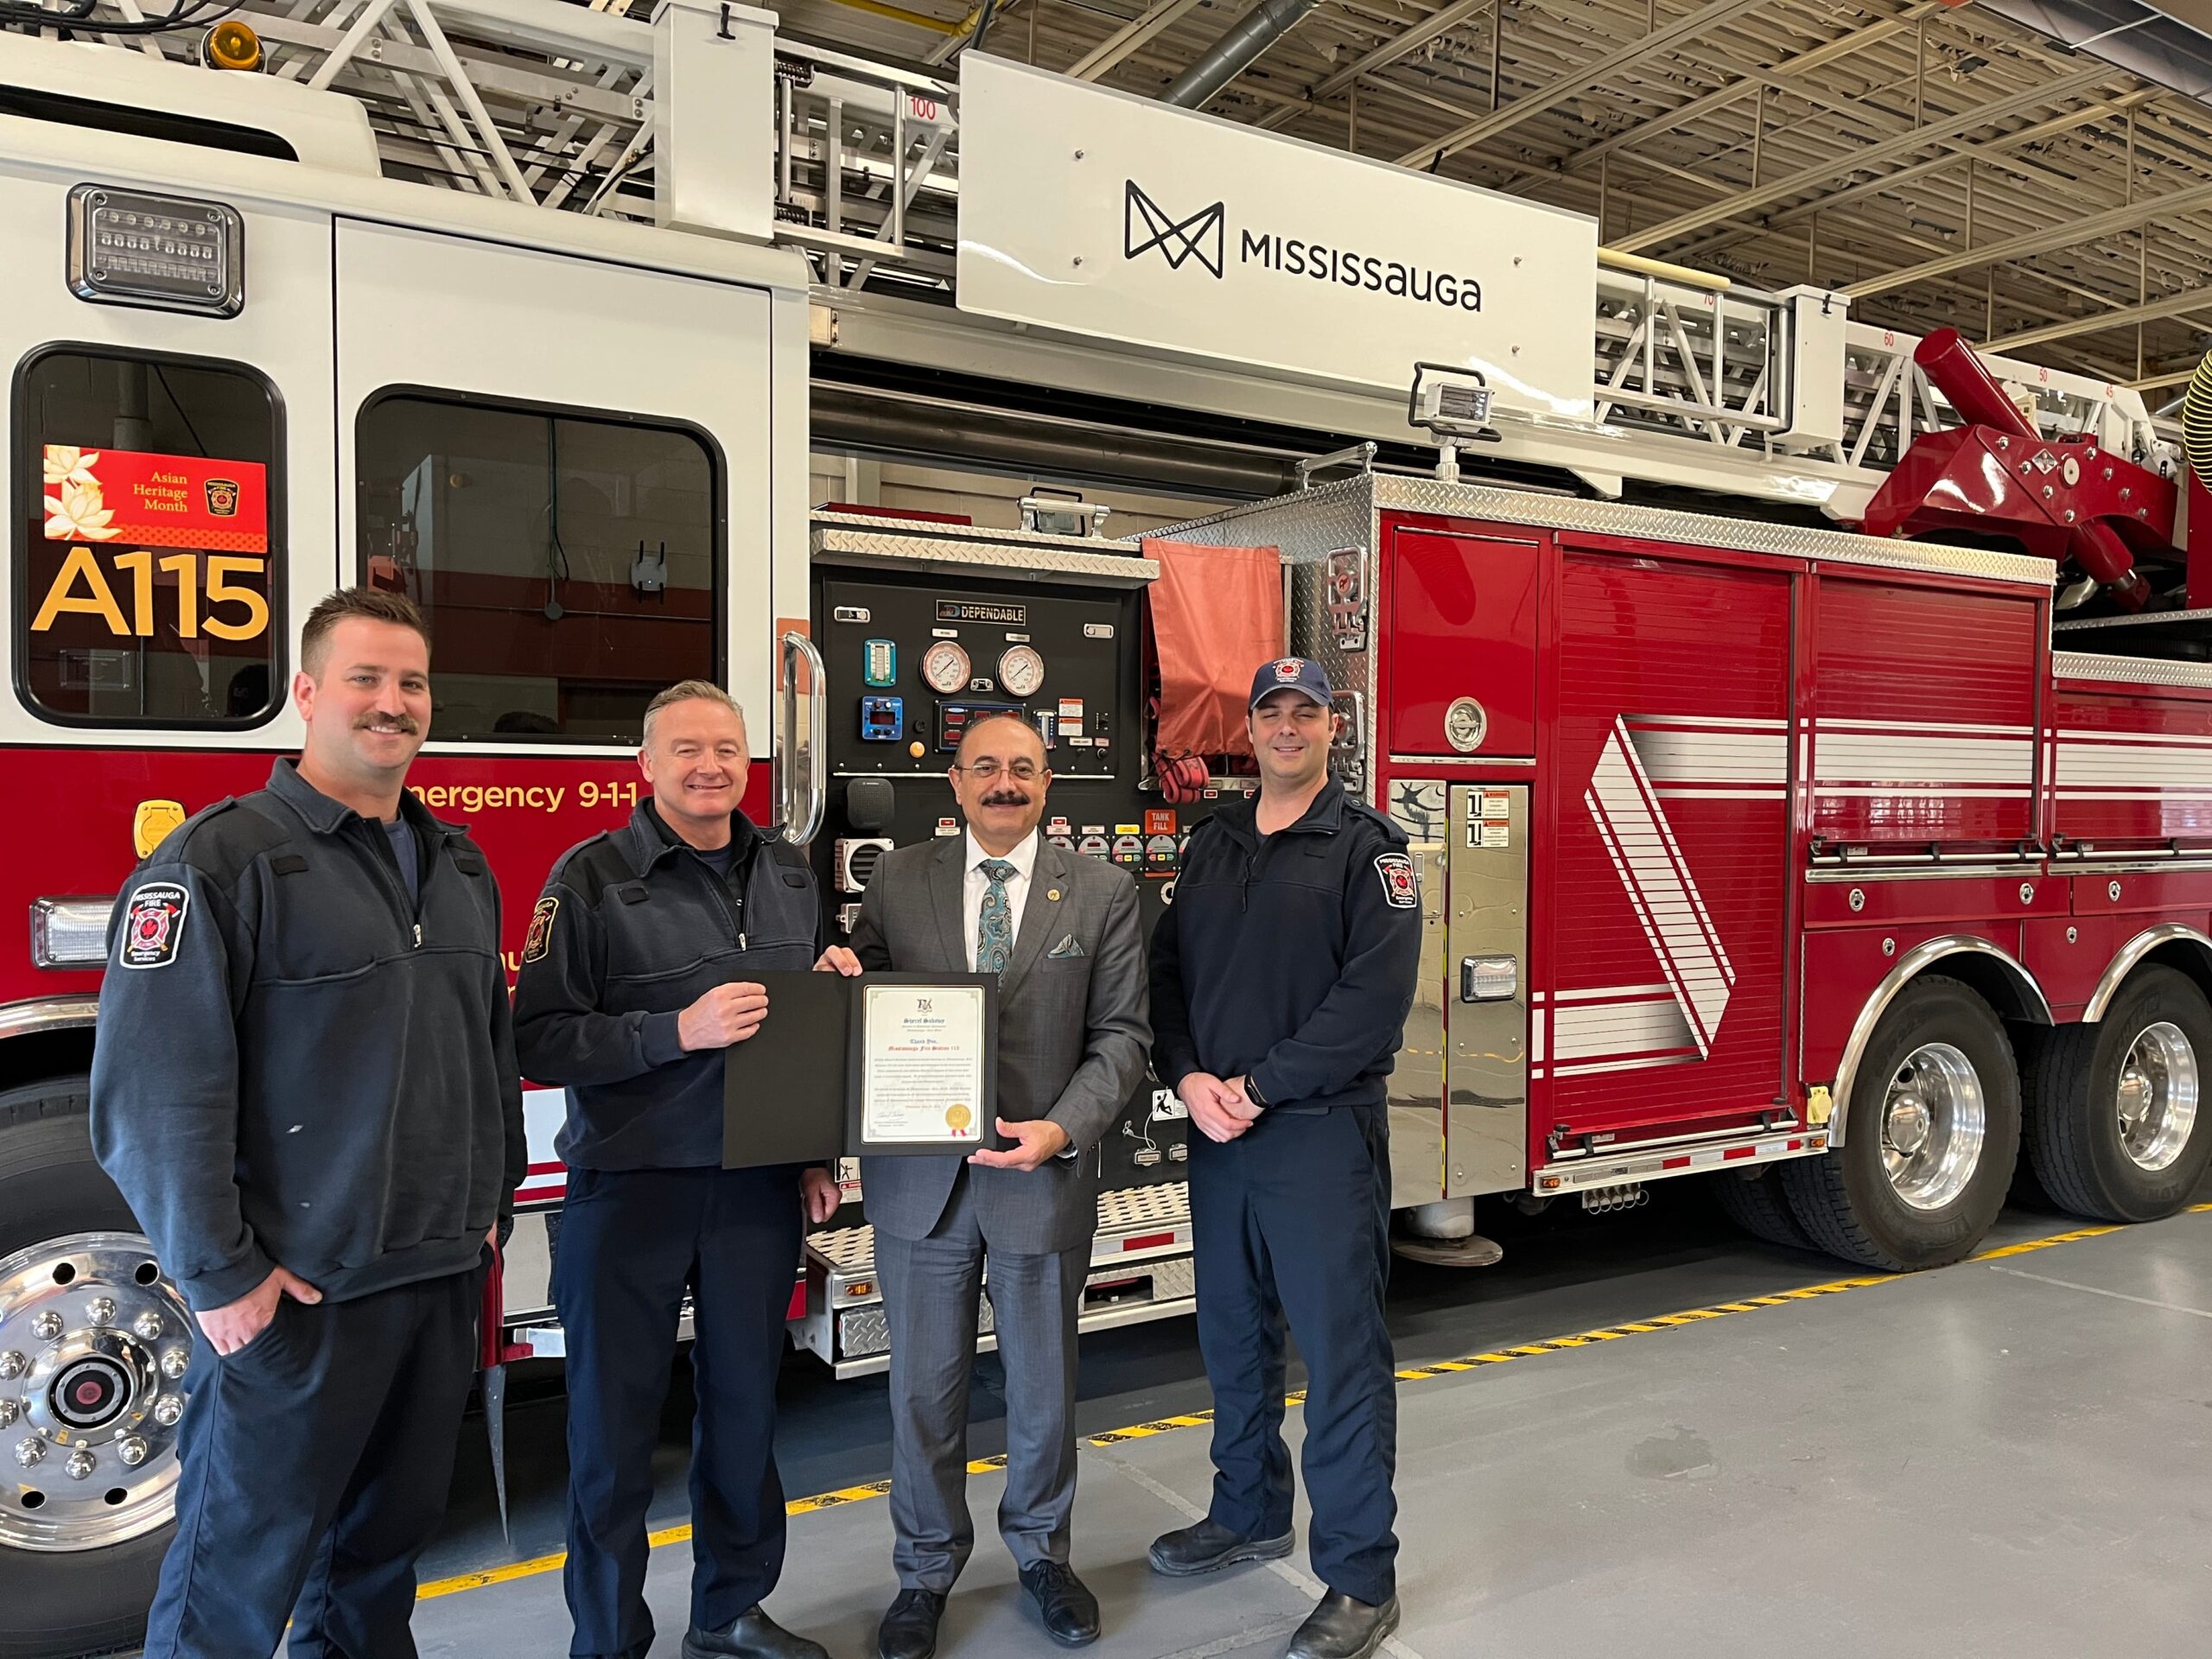 MPP Sabawy gives a congratulatory certificate to Mississauga firefighters on International Firefighters Day.